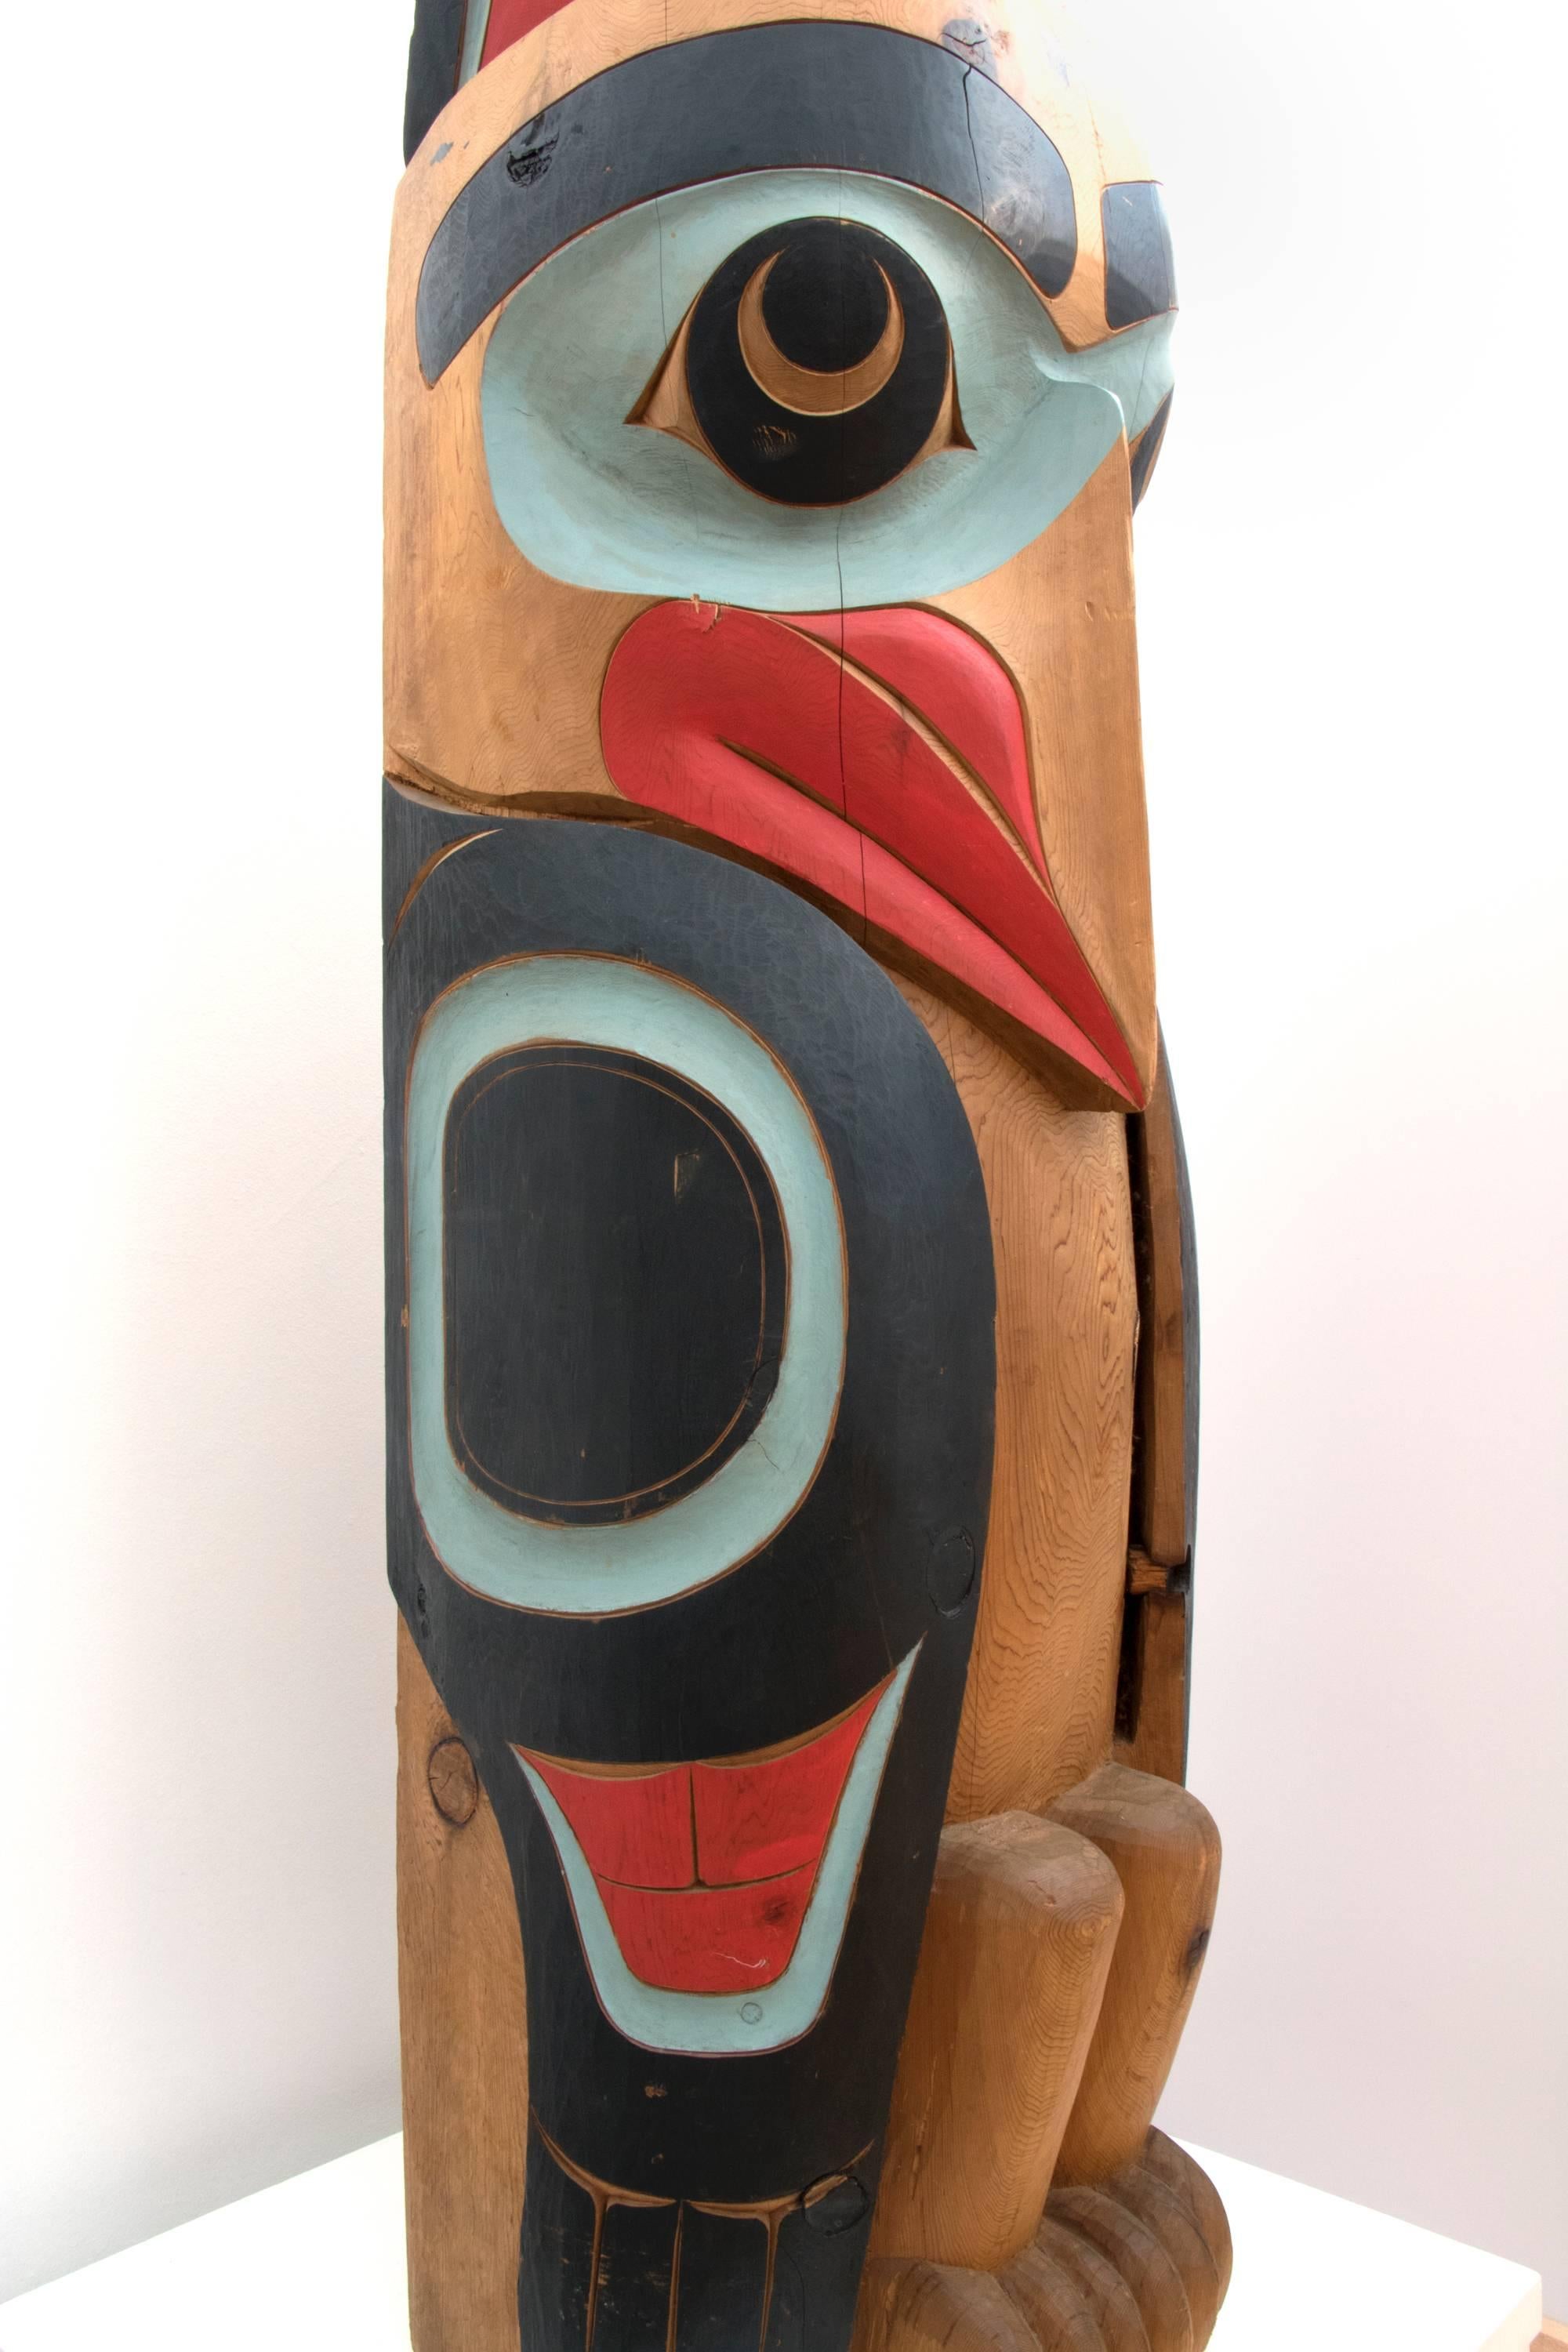 Northwest coast Totem Pole segment. 

About the Artist:
Francis Horne was born in Mt. Vernon, Washington and currently resides in British Columbia.  He started carving in 1973, he considers himself to be primarily self-taught and also studied